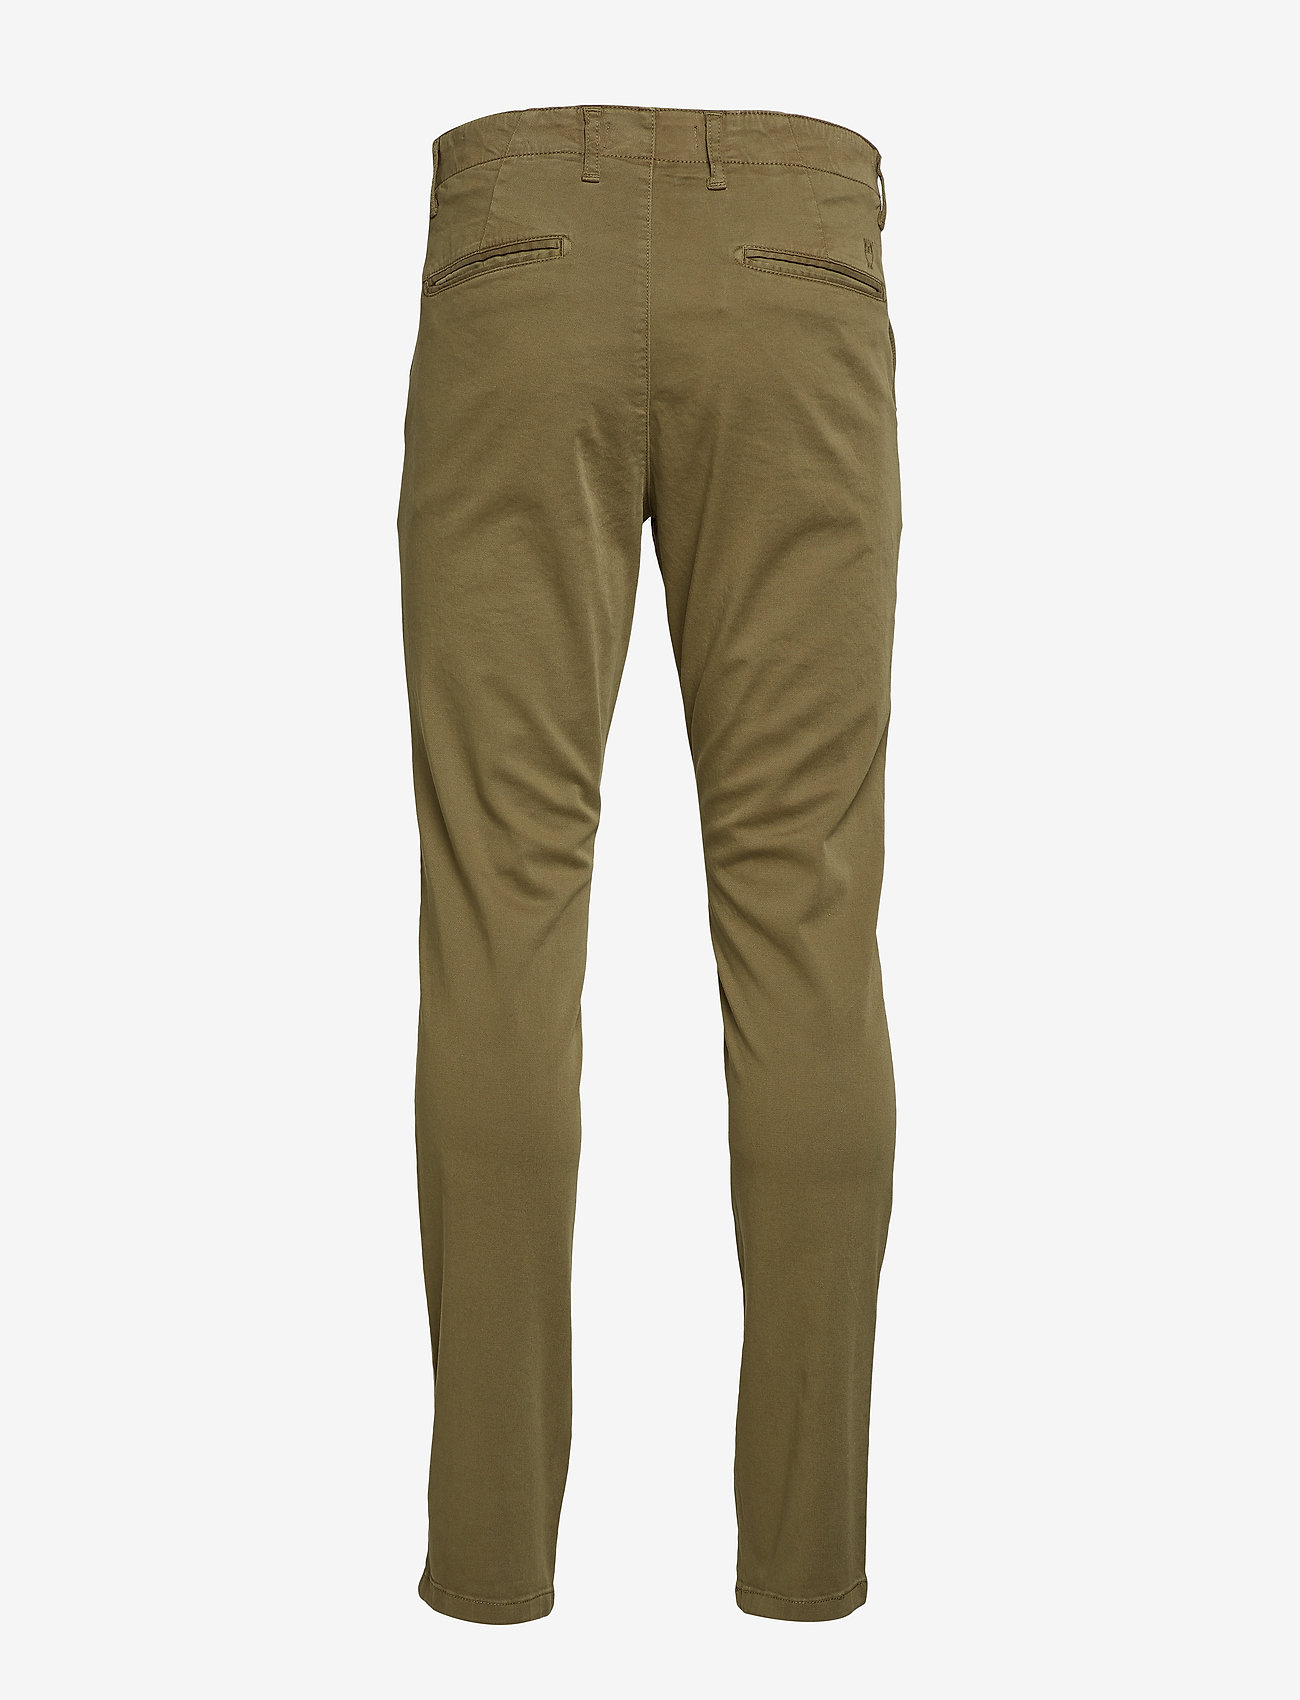 Knowledge Cotton Apparel - JOE slim stretched chino pant - GOT - chino's - burned olive - 1